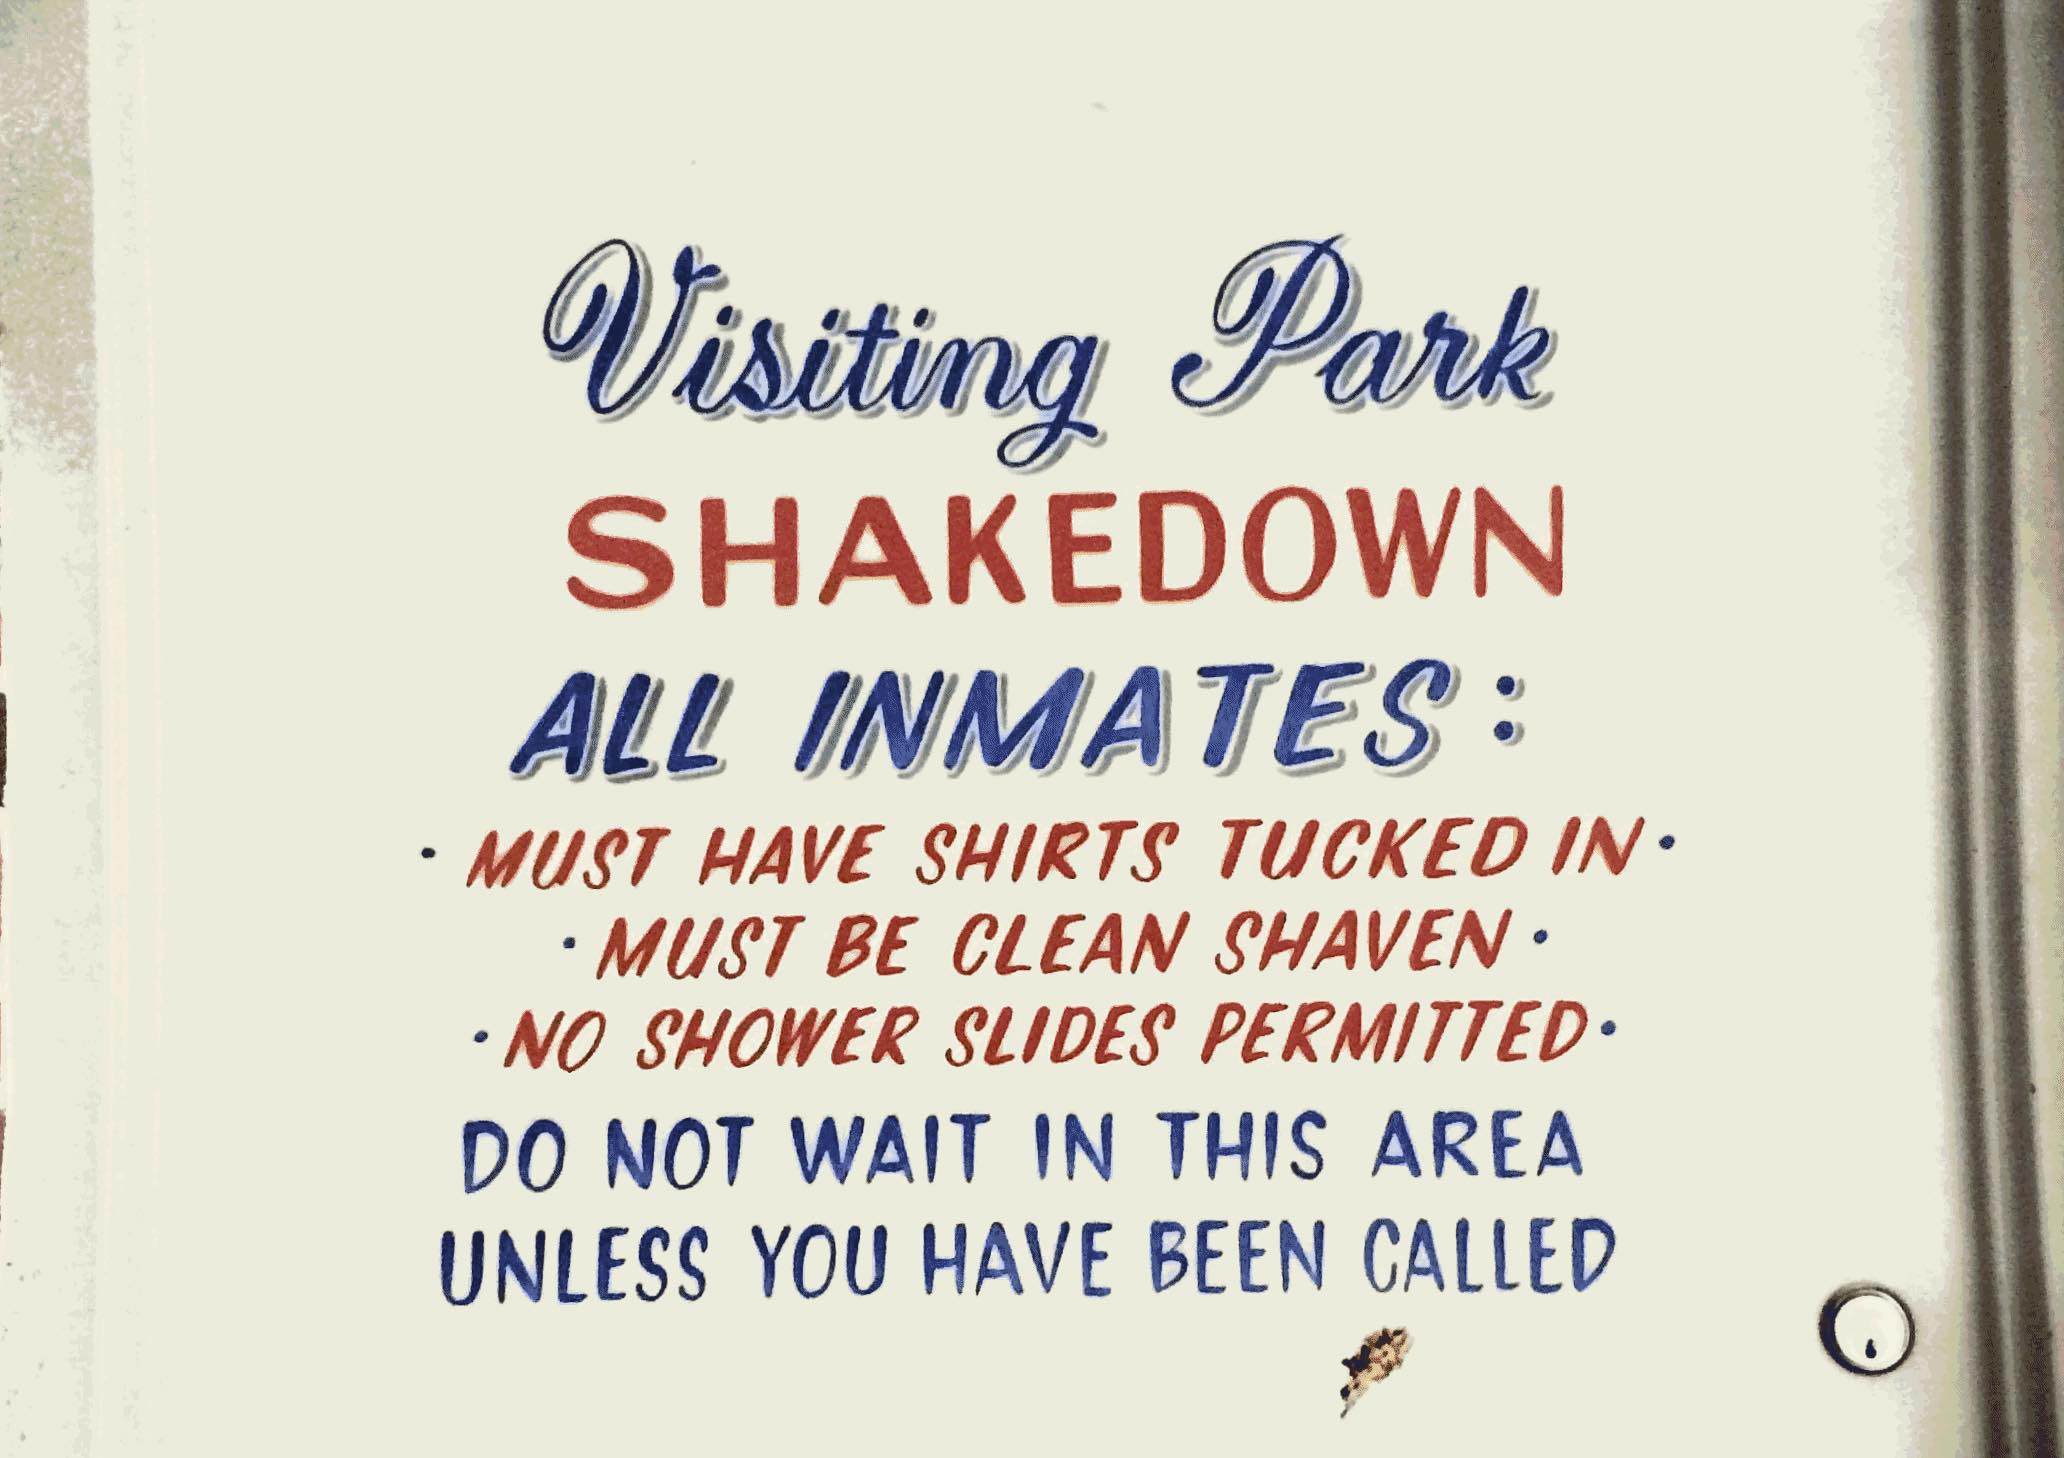 Slide 15: A photo of a sign that reads, 'Visiting park shakedown. All inmates must have shirt tucked in, must be clean shaven, no shower slides permitted. DO NOT WAIT IN THIS AREA UNLESS YOU HAVE BEEN CALLED.'